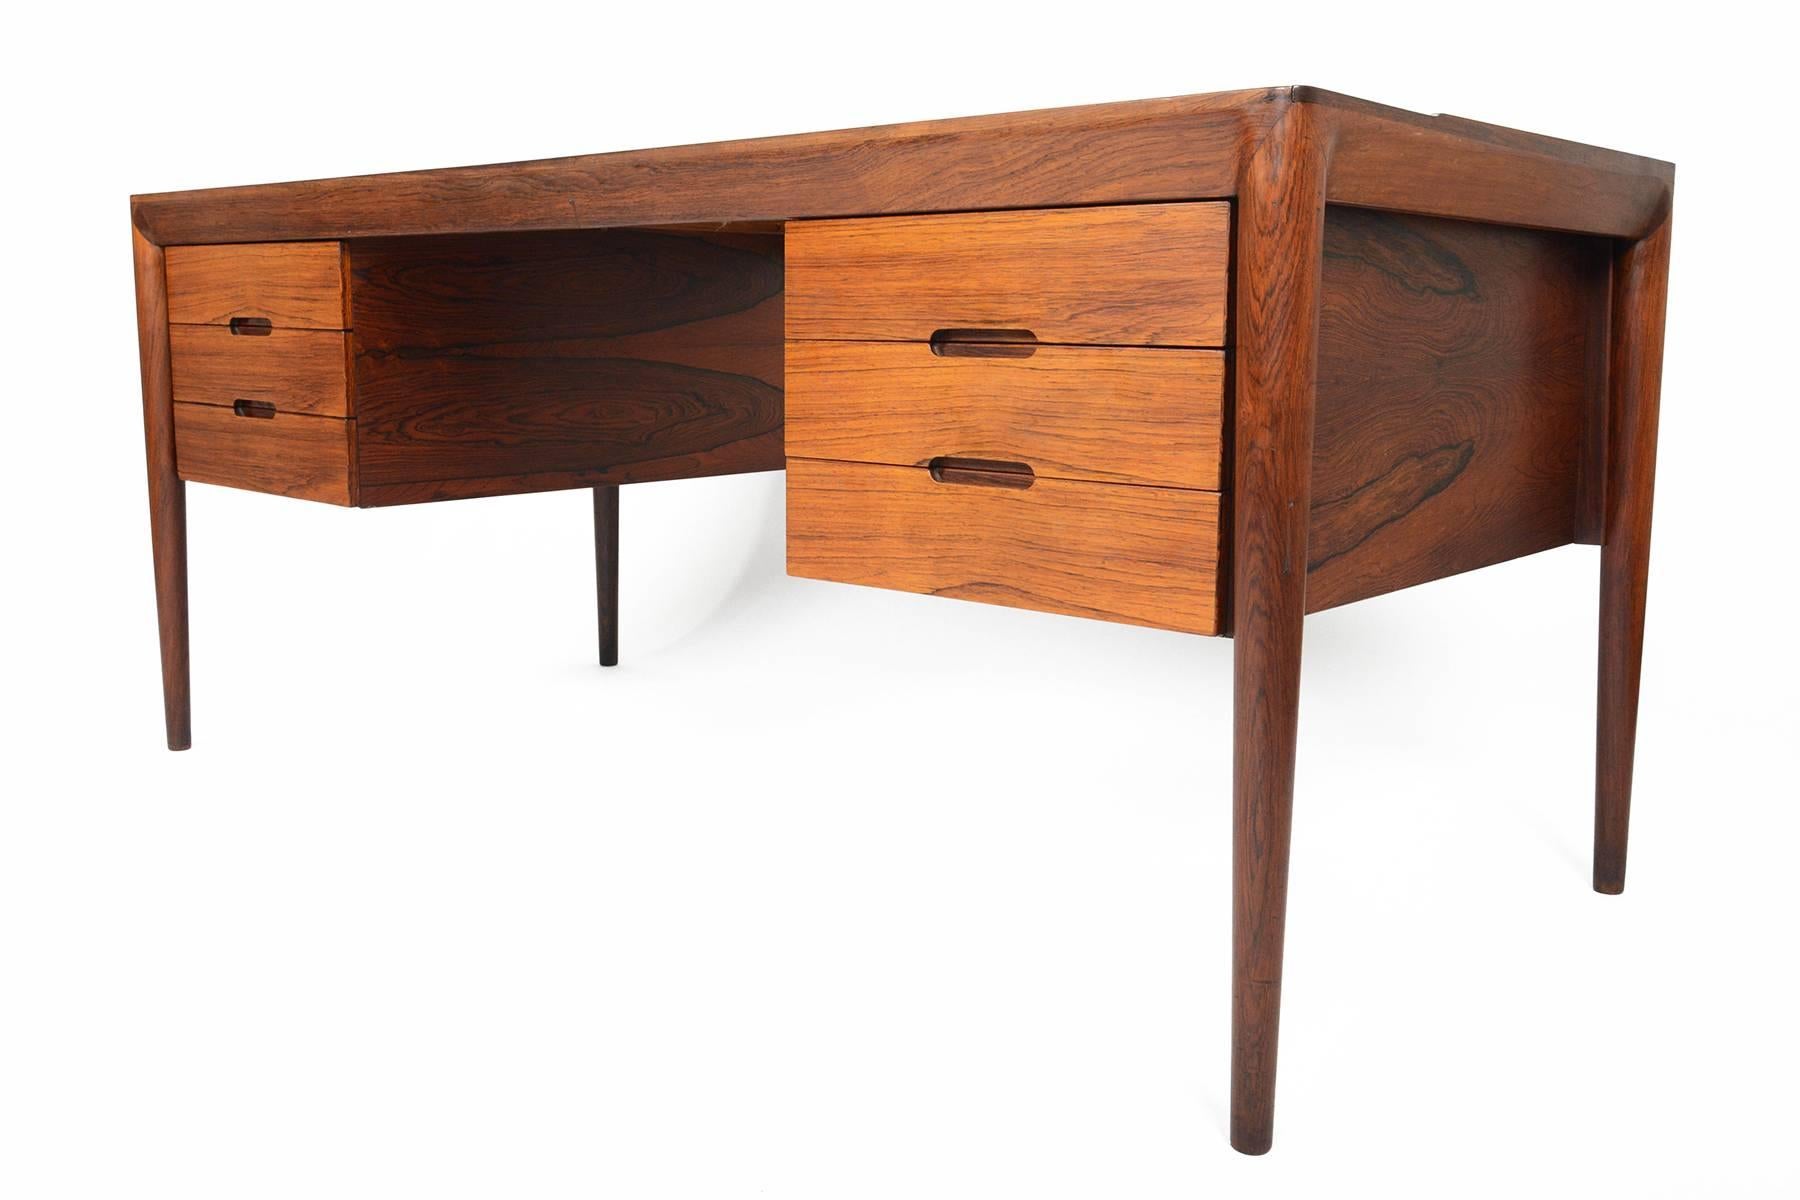 This rare Danish modern executive desk was designed by Erik Riisager Hansen for Haslev Møbelsnedkeri in the 1960s. The beautiful thick banding seamless joins with the tall spindle leg and is a signature design element of the Hansen. Crafted in